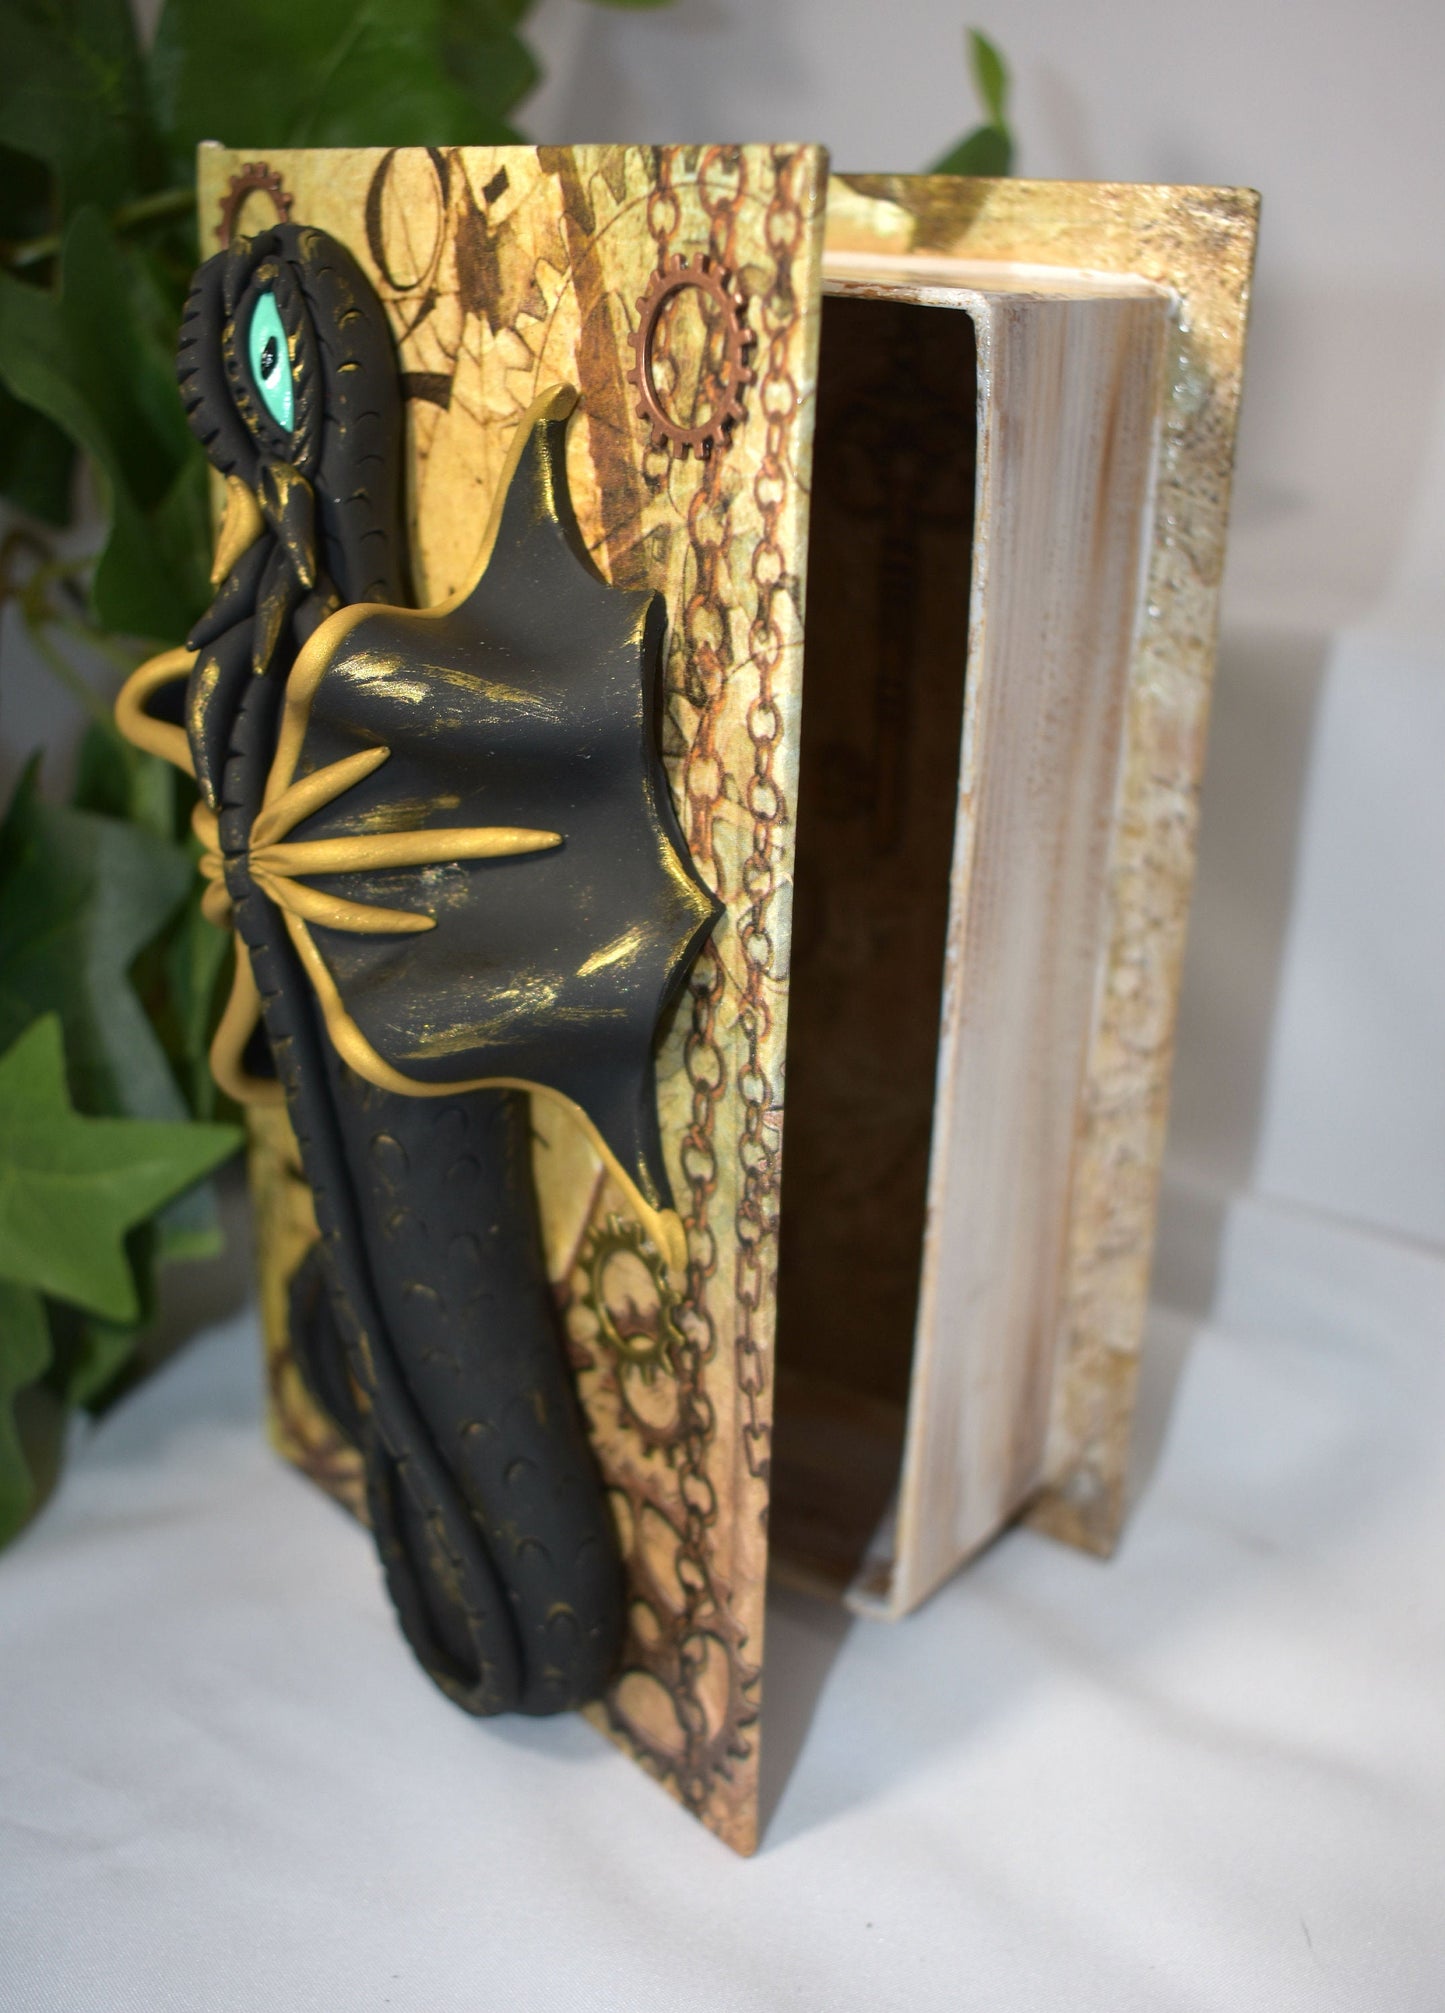 Polymer Clay Black and Gold Dragon on Altered Paper Mache Box - 1-117